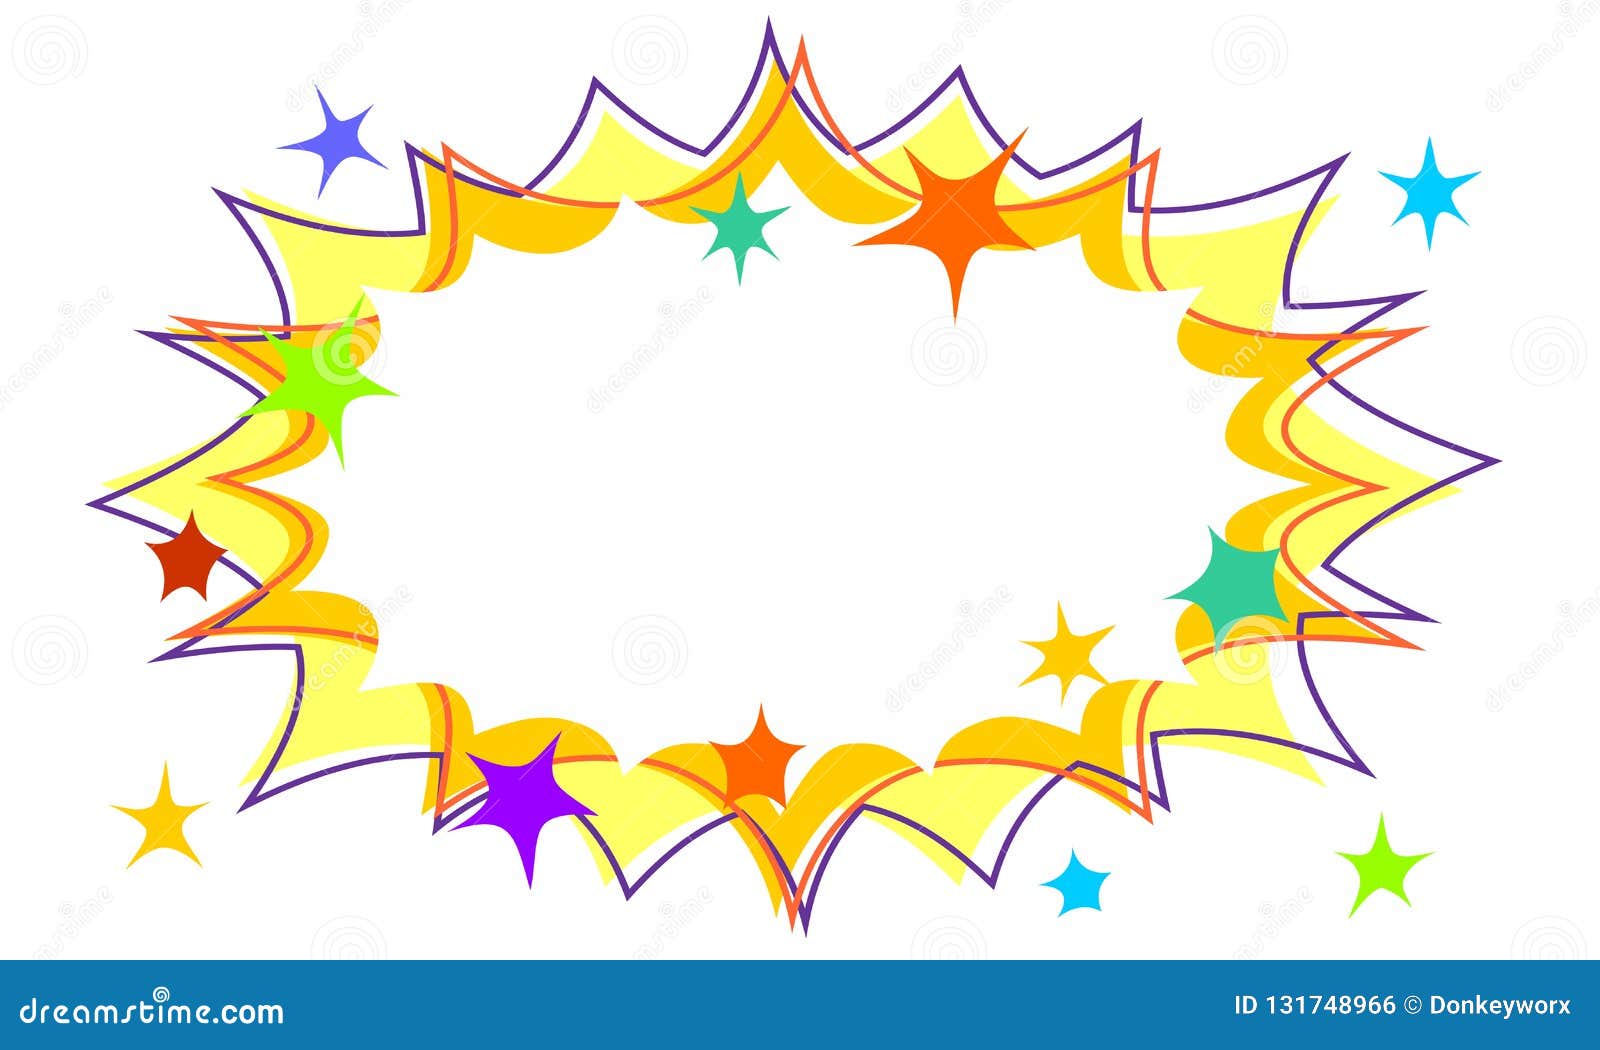 party starburst flash background with stars and offset outlines